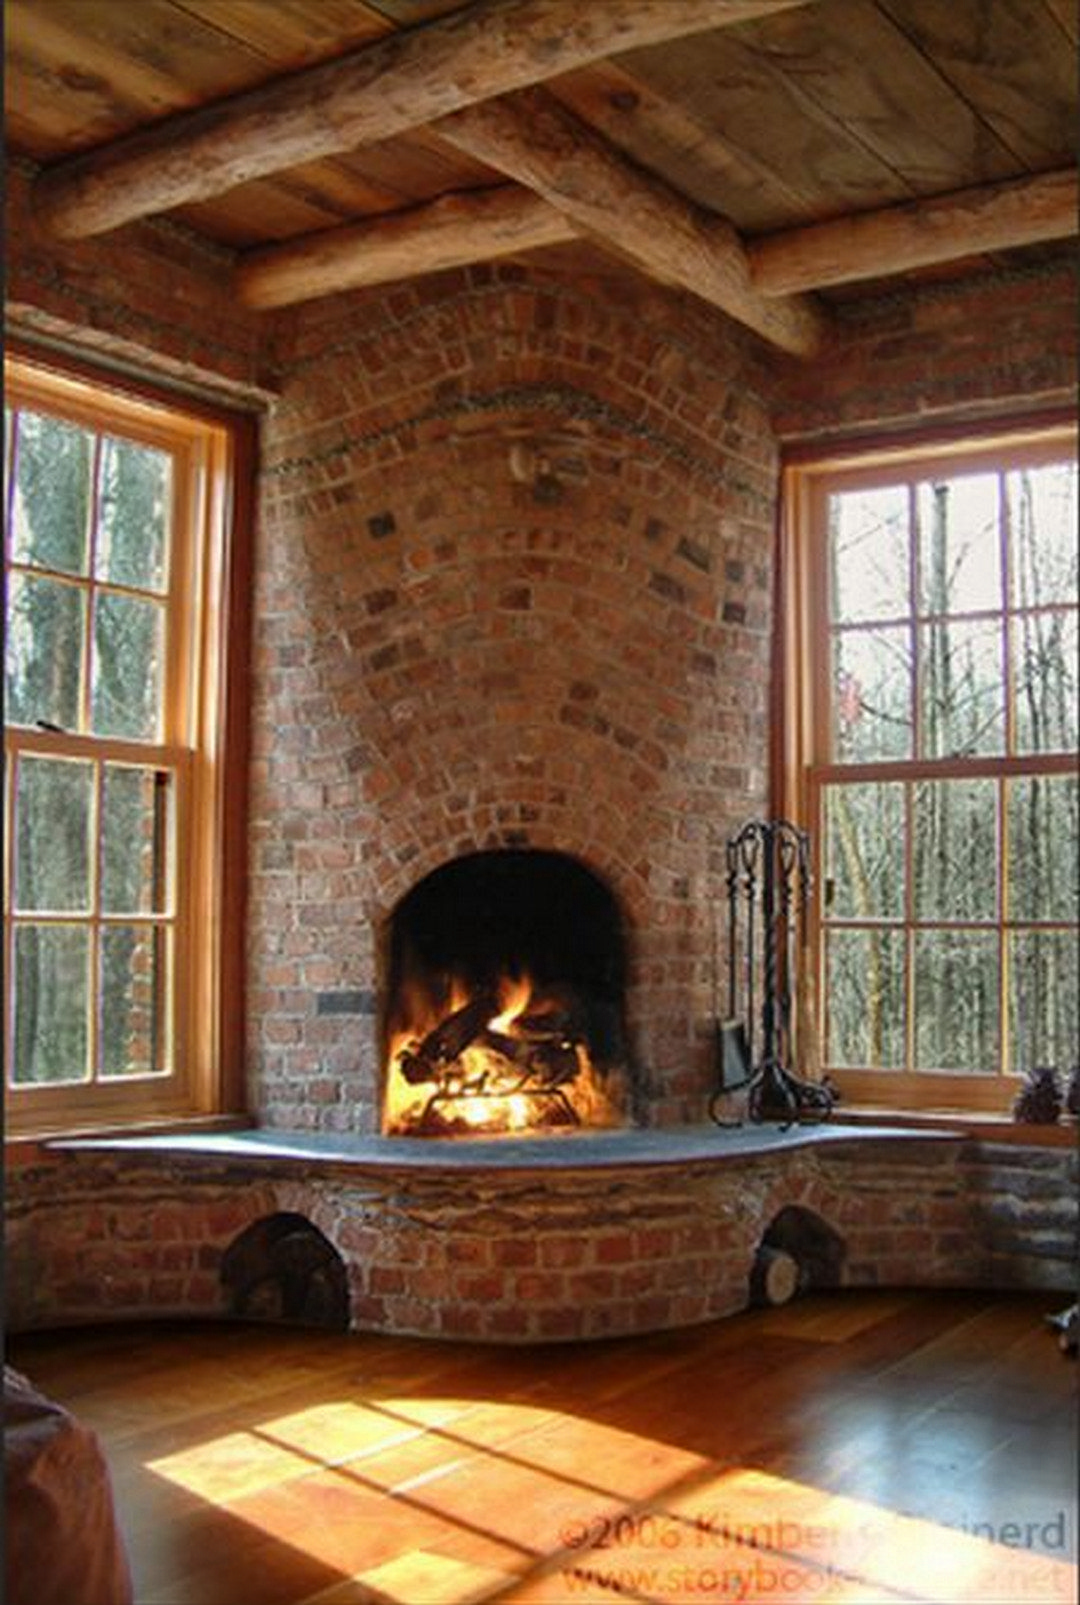 Arnold Stove and Fireplace Inspirational 795 Best Fireplaces Images In 2019